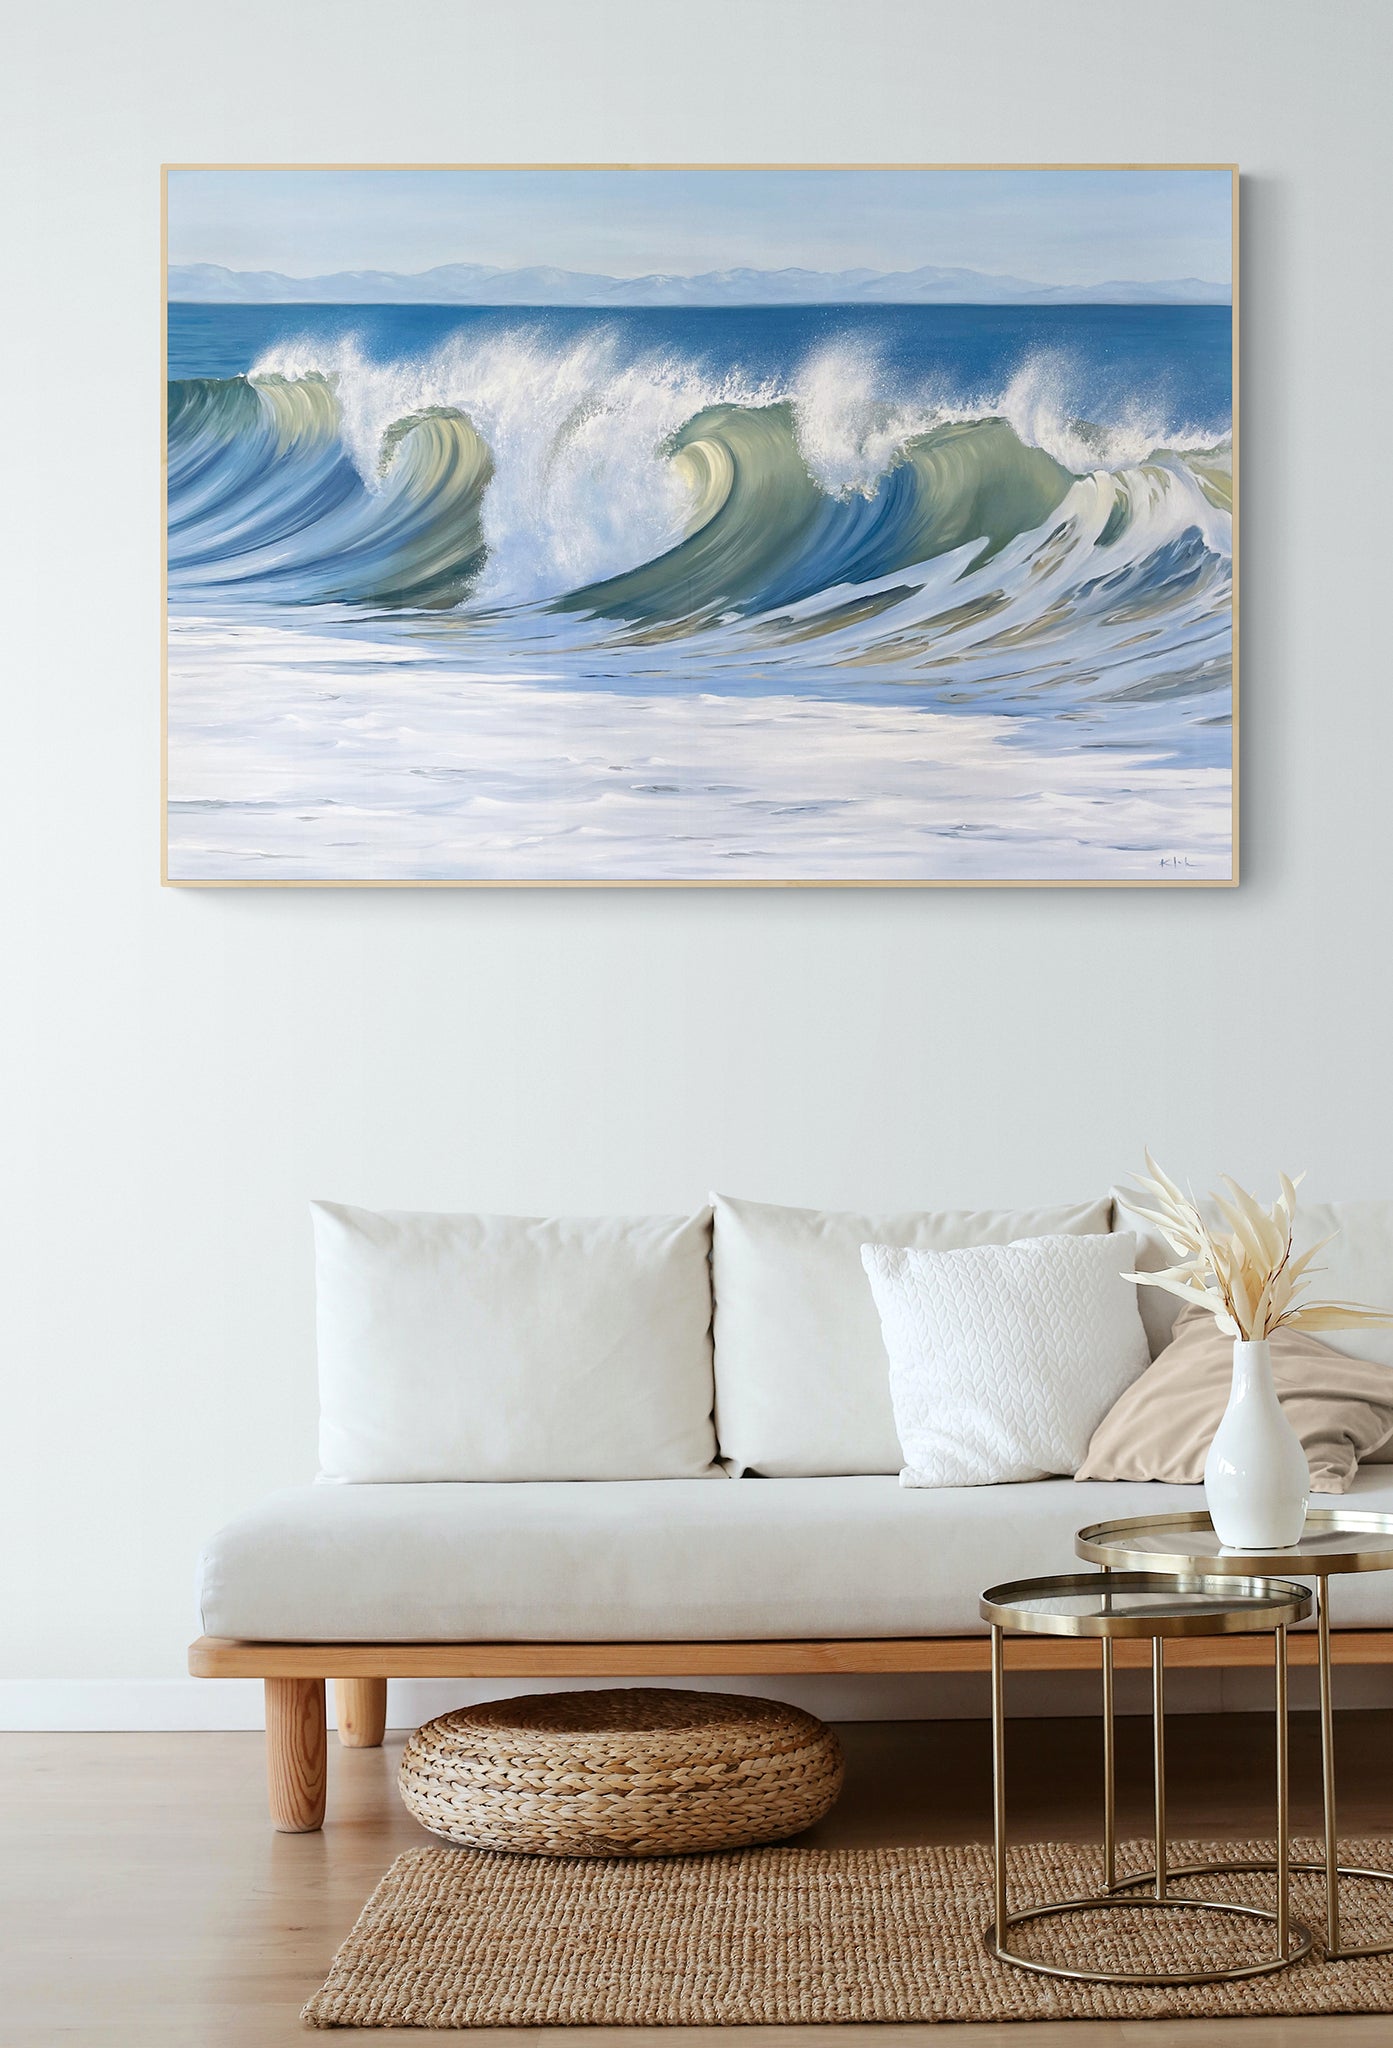 Large canvas art for living room